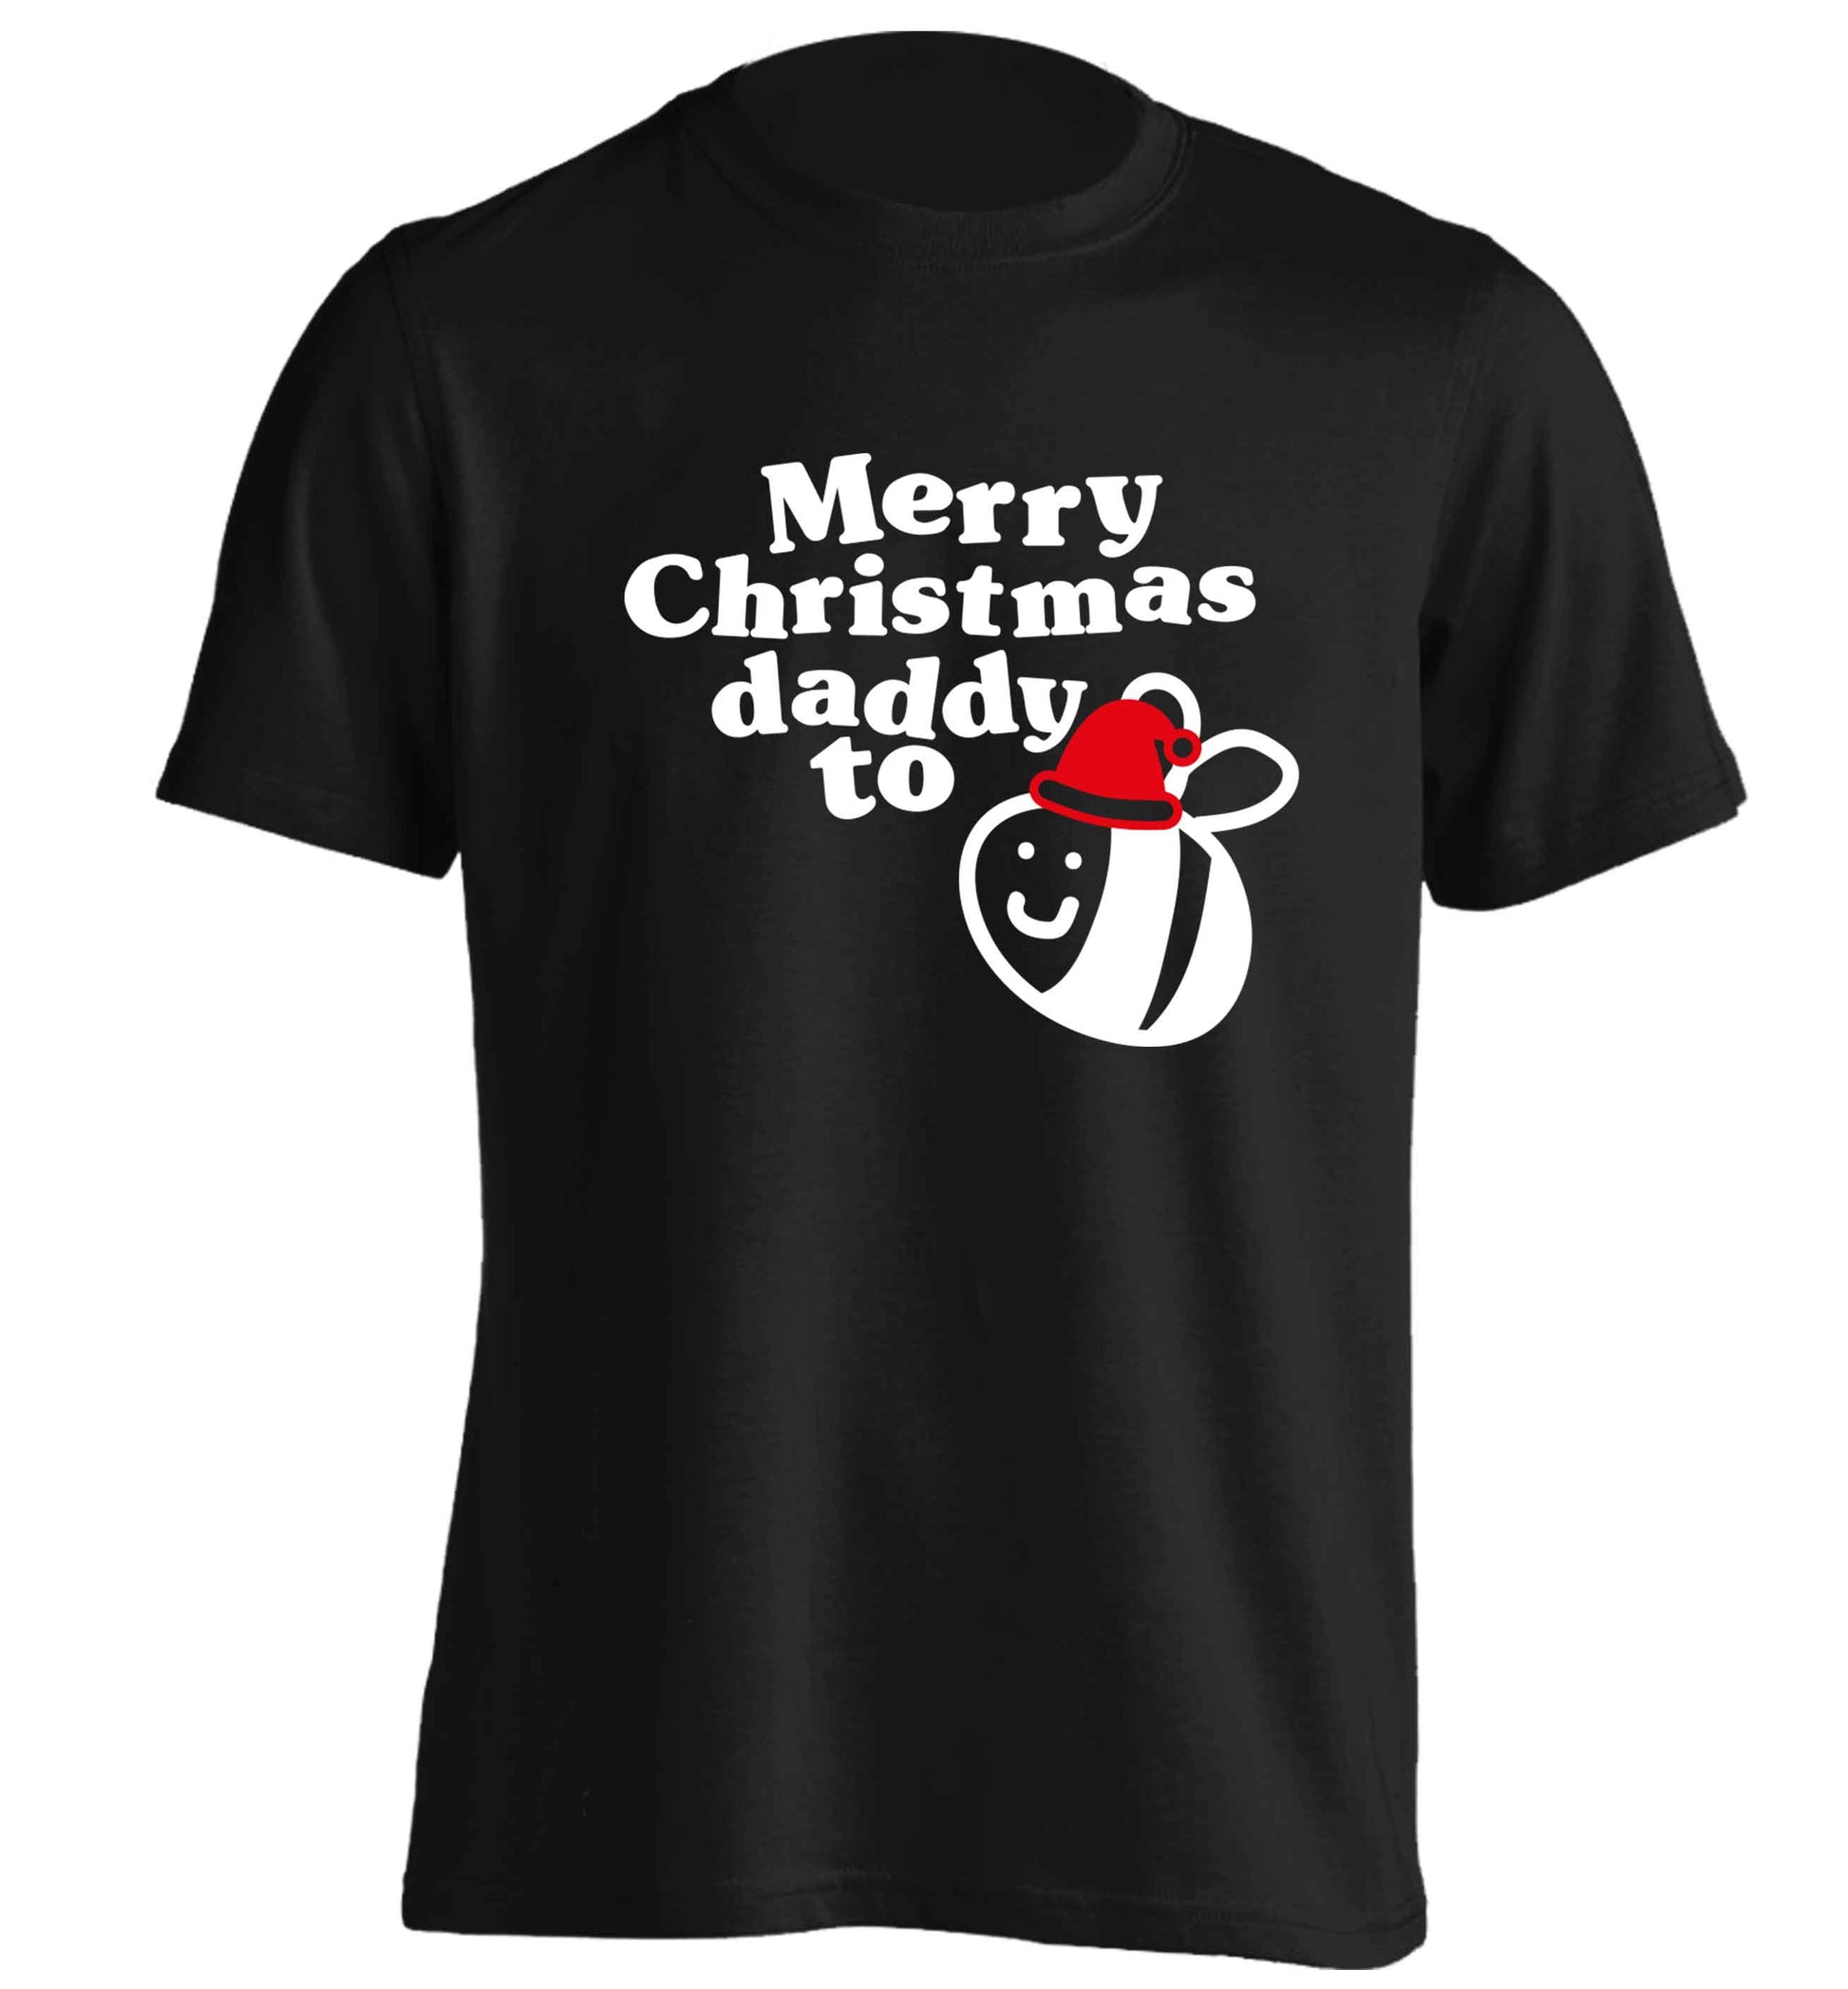 Merry Christmas daddy to be adults unisex black Tshirt 2XL